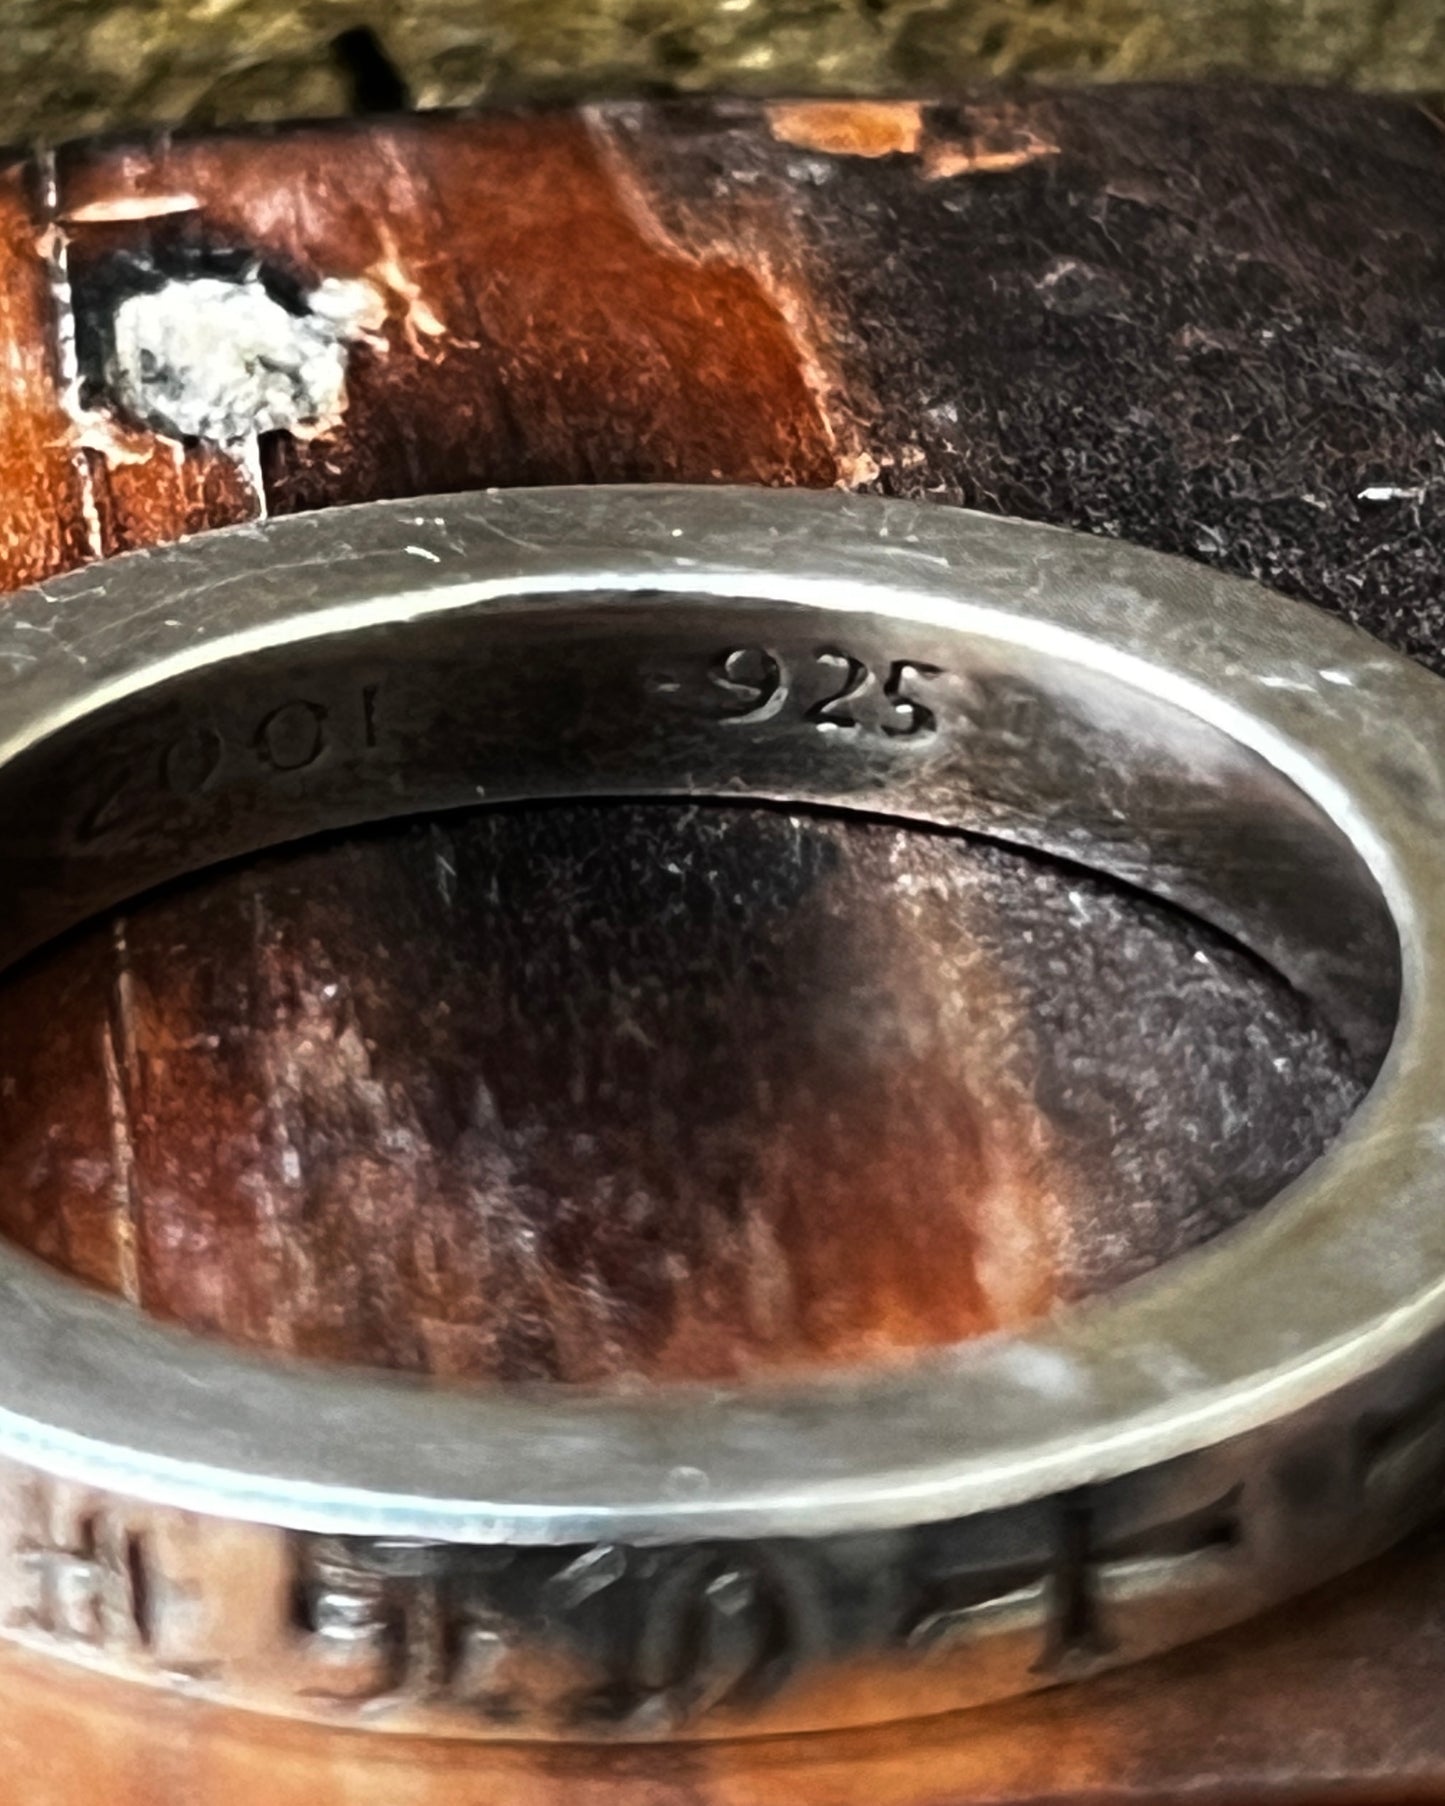 Chrome Hearts "Fuck You" Spacer Ring